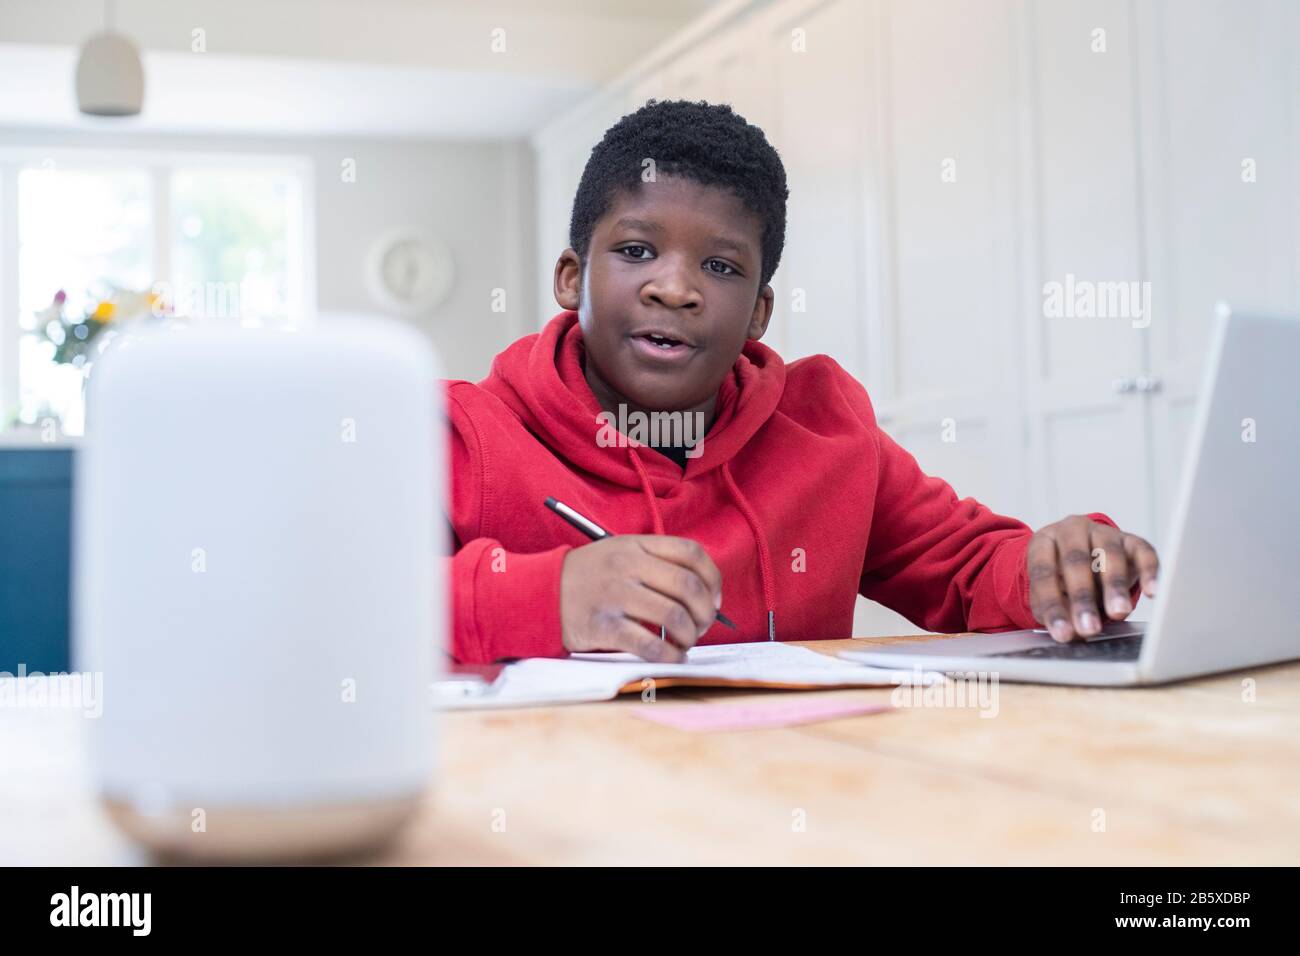 Boy Doing Homework At Home Asking Digital Assistant Question Stock Photo